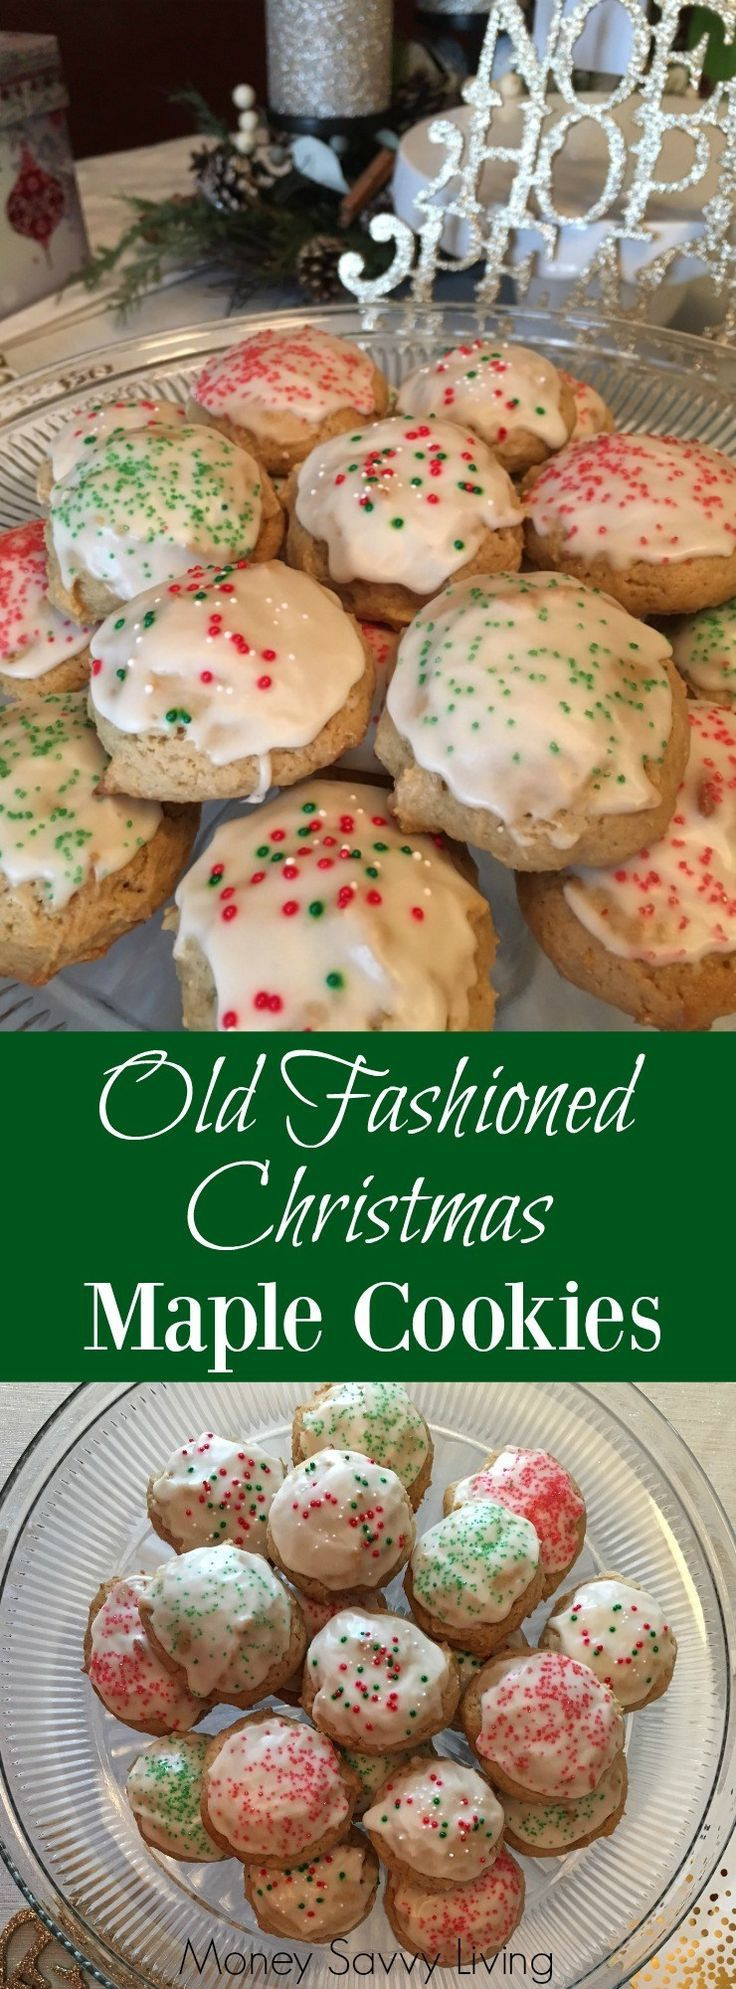 Old Fashioned Christmas Cookies
 Best 25 Old fashioned christmas ideas on Pinterest